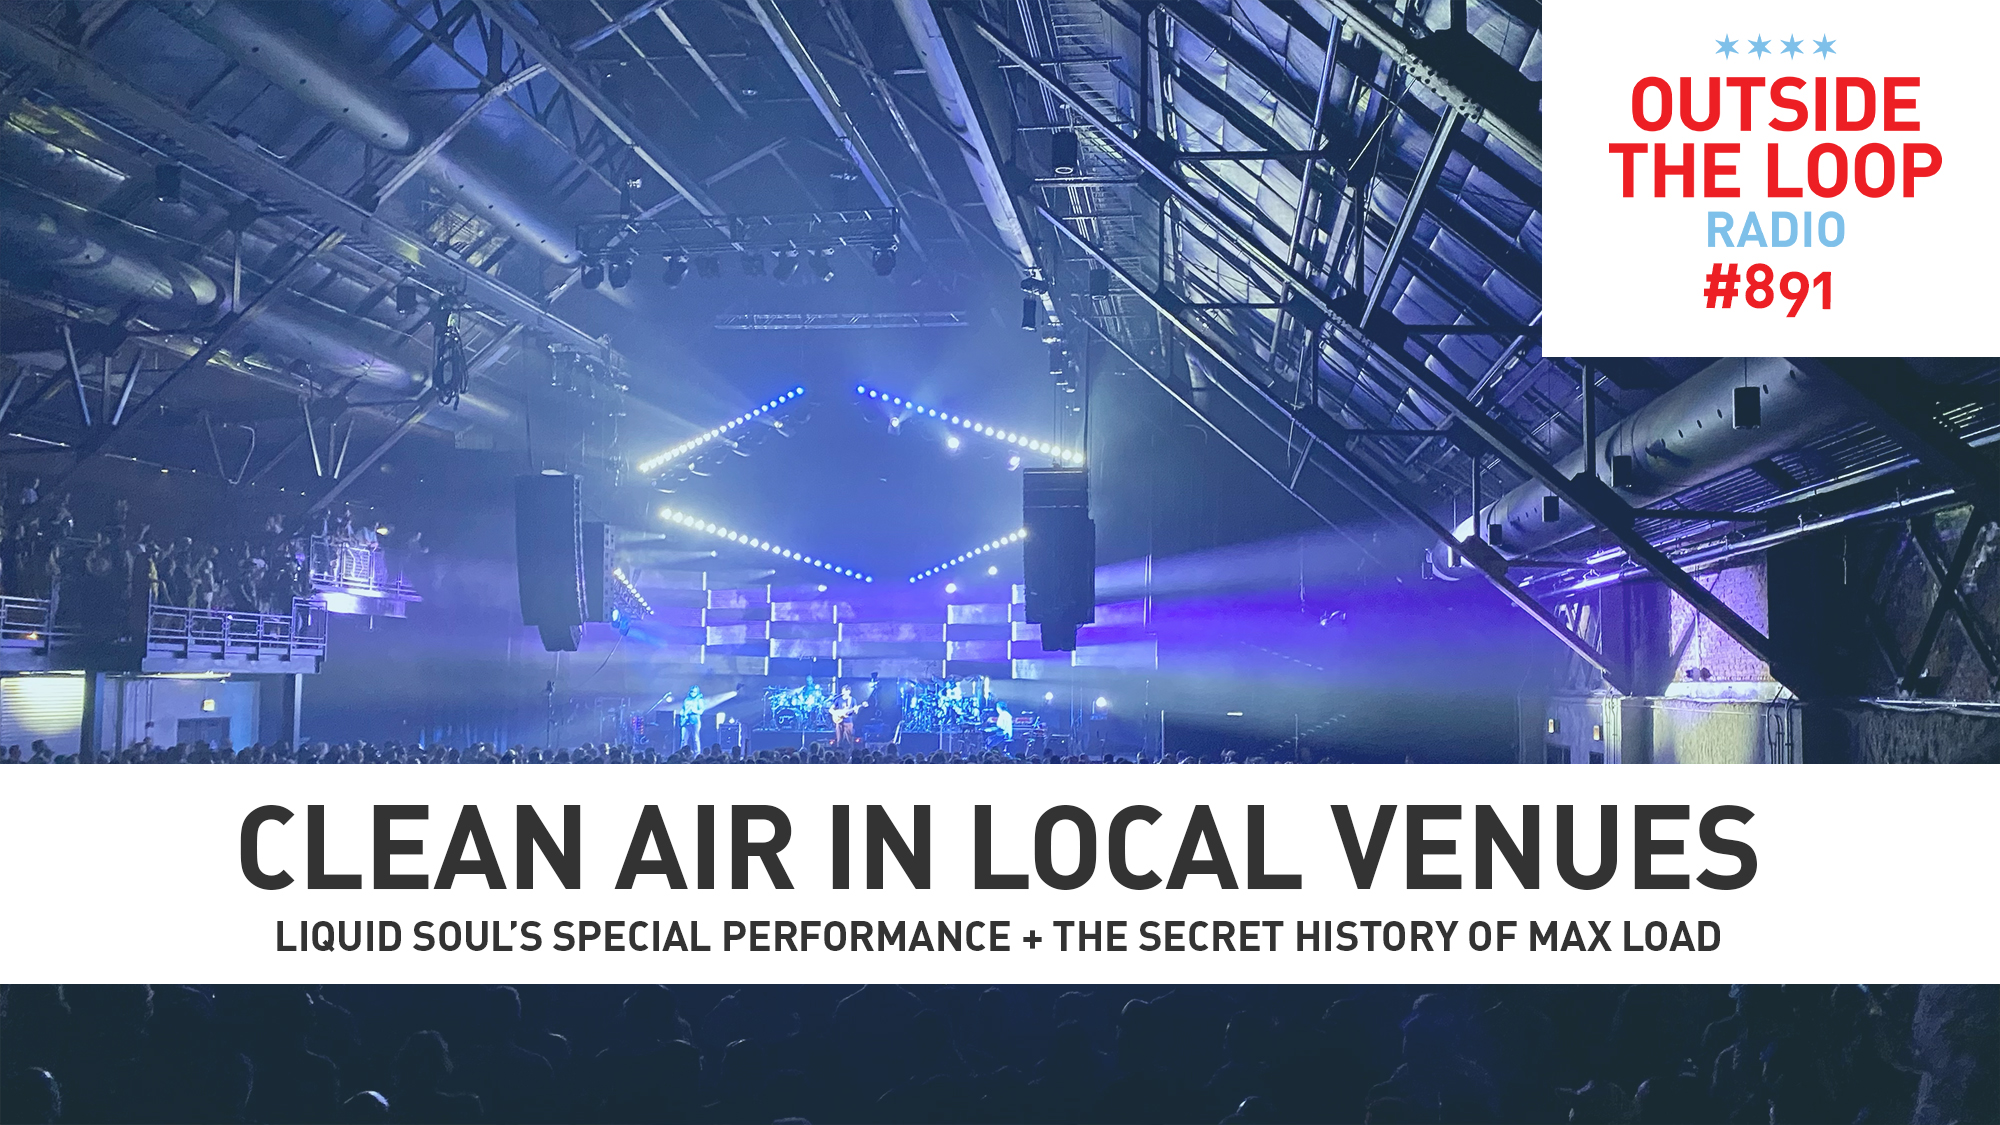 This week we learn about the efforts to purify air in local venues. (Photo credit: Mike Stephen/WGN Radio)